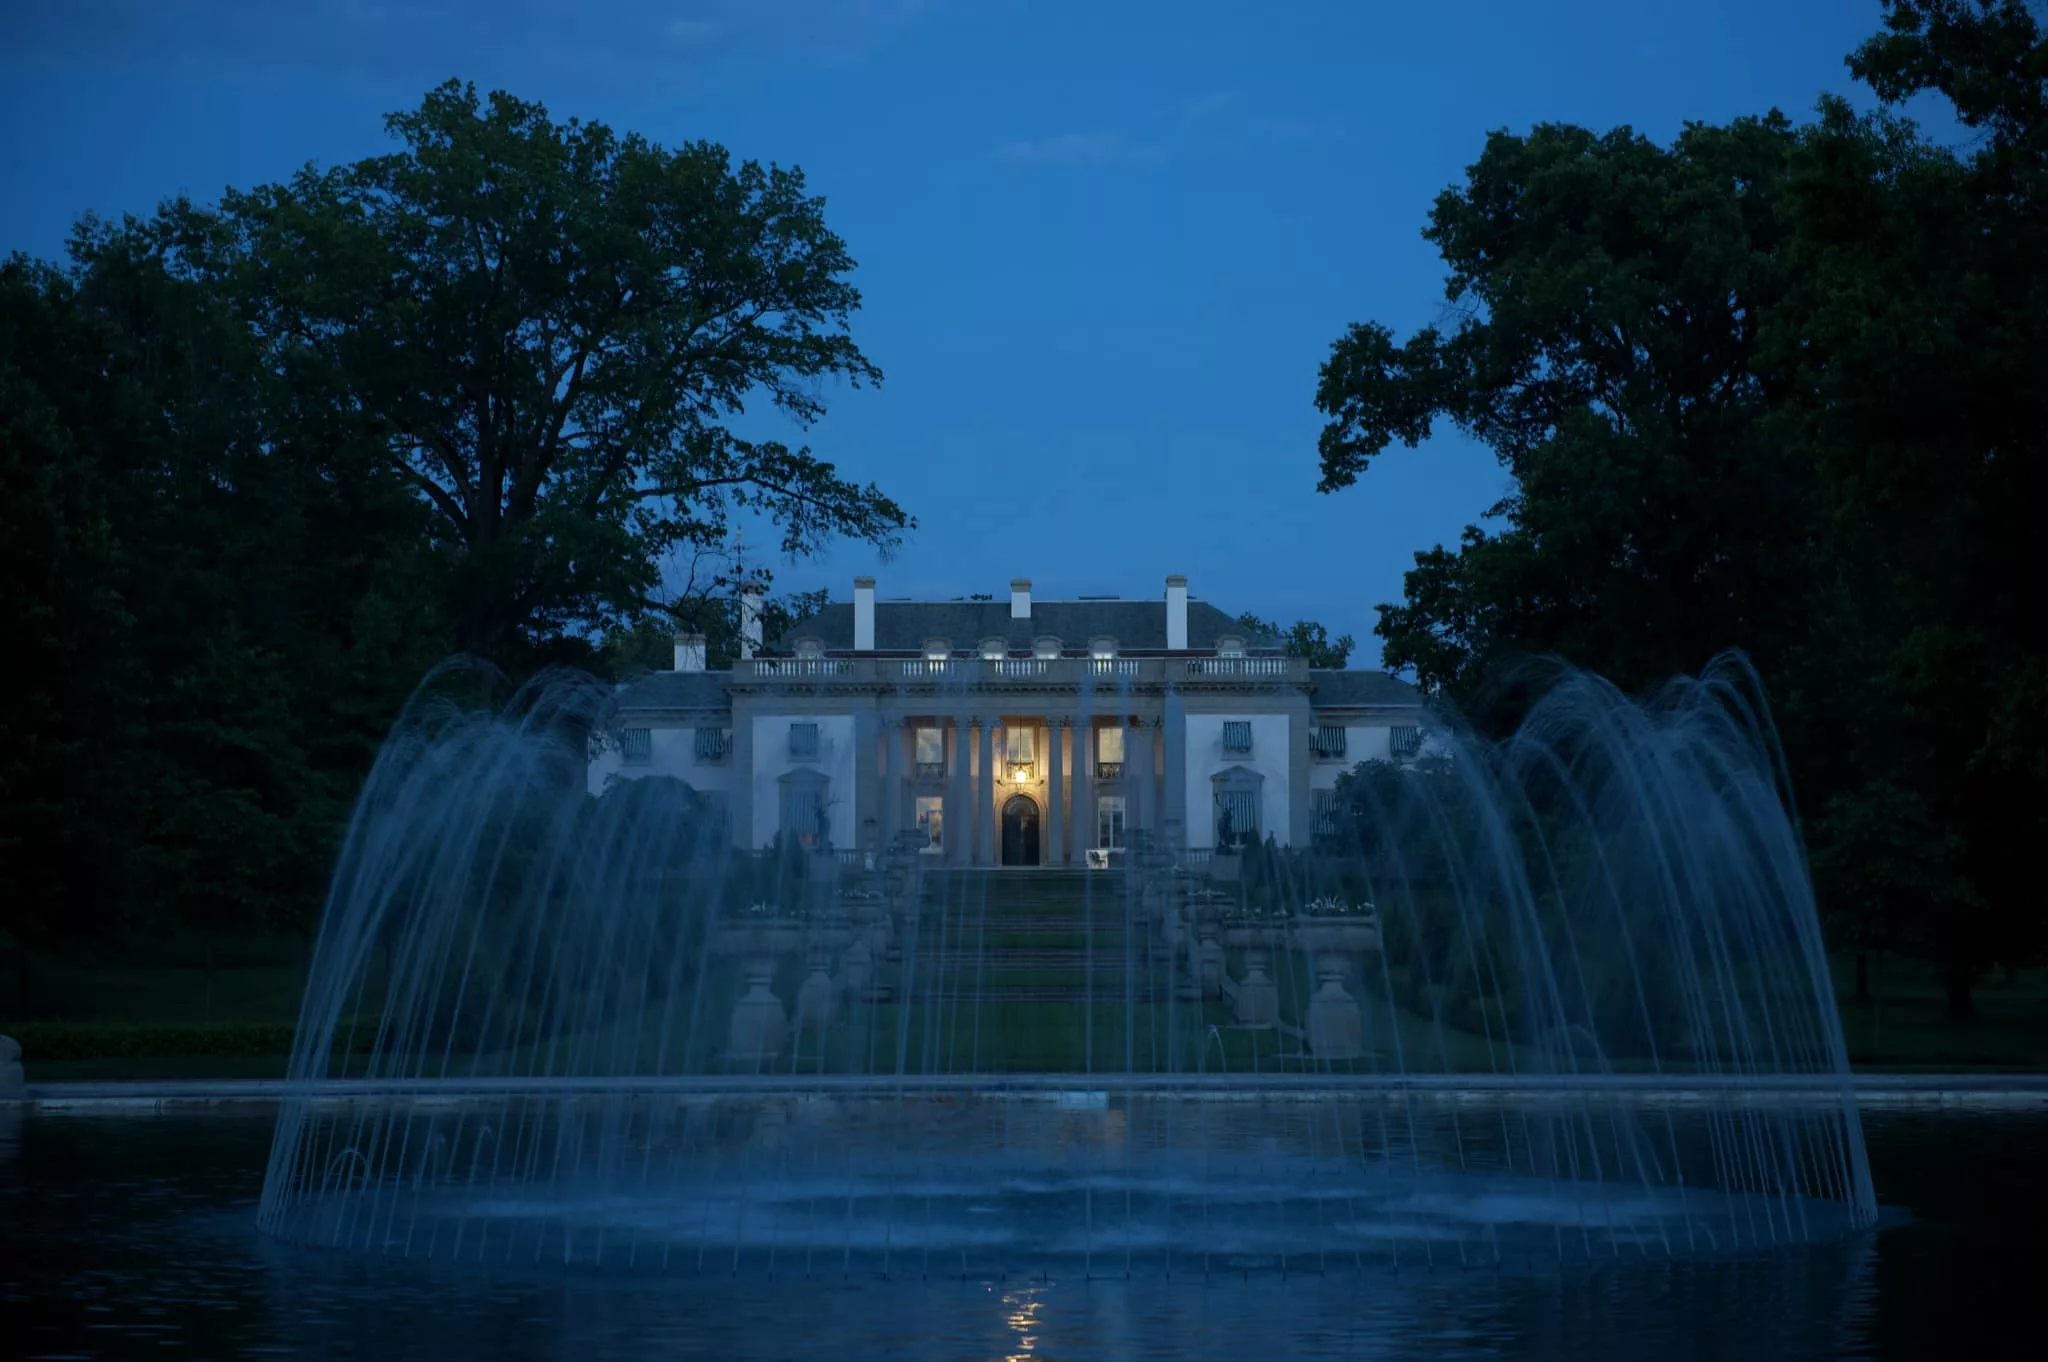 Nemours Estate at dusk, surrounded by trees, overlooking a fountain.